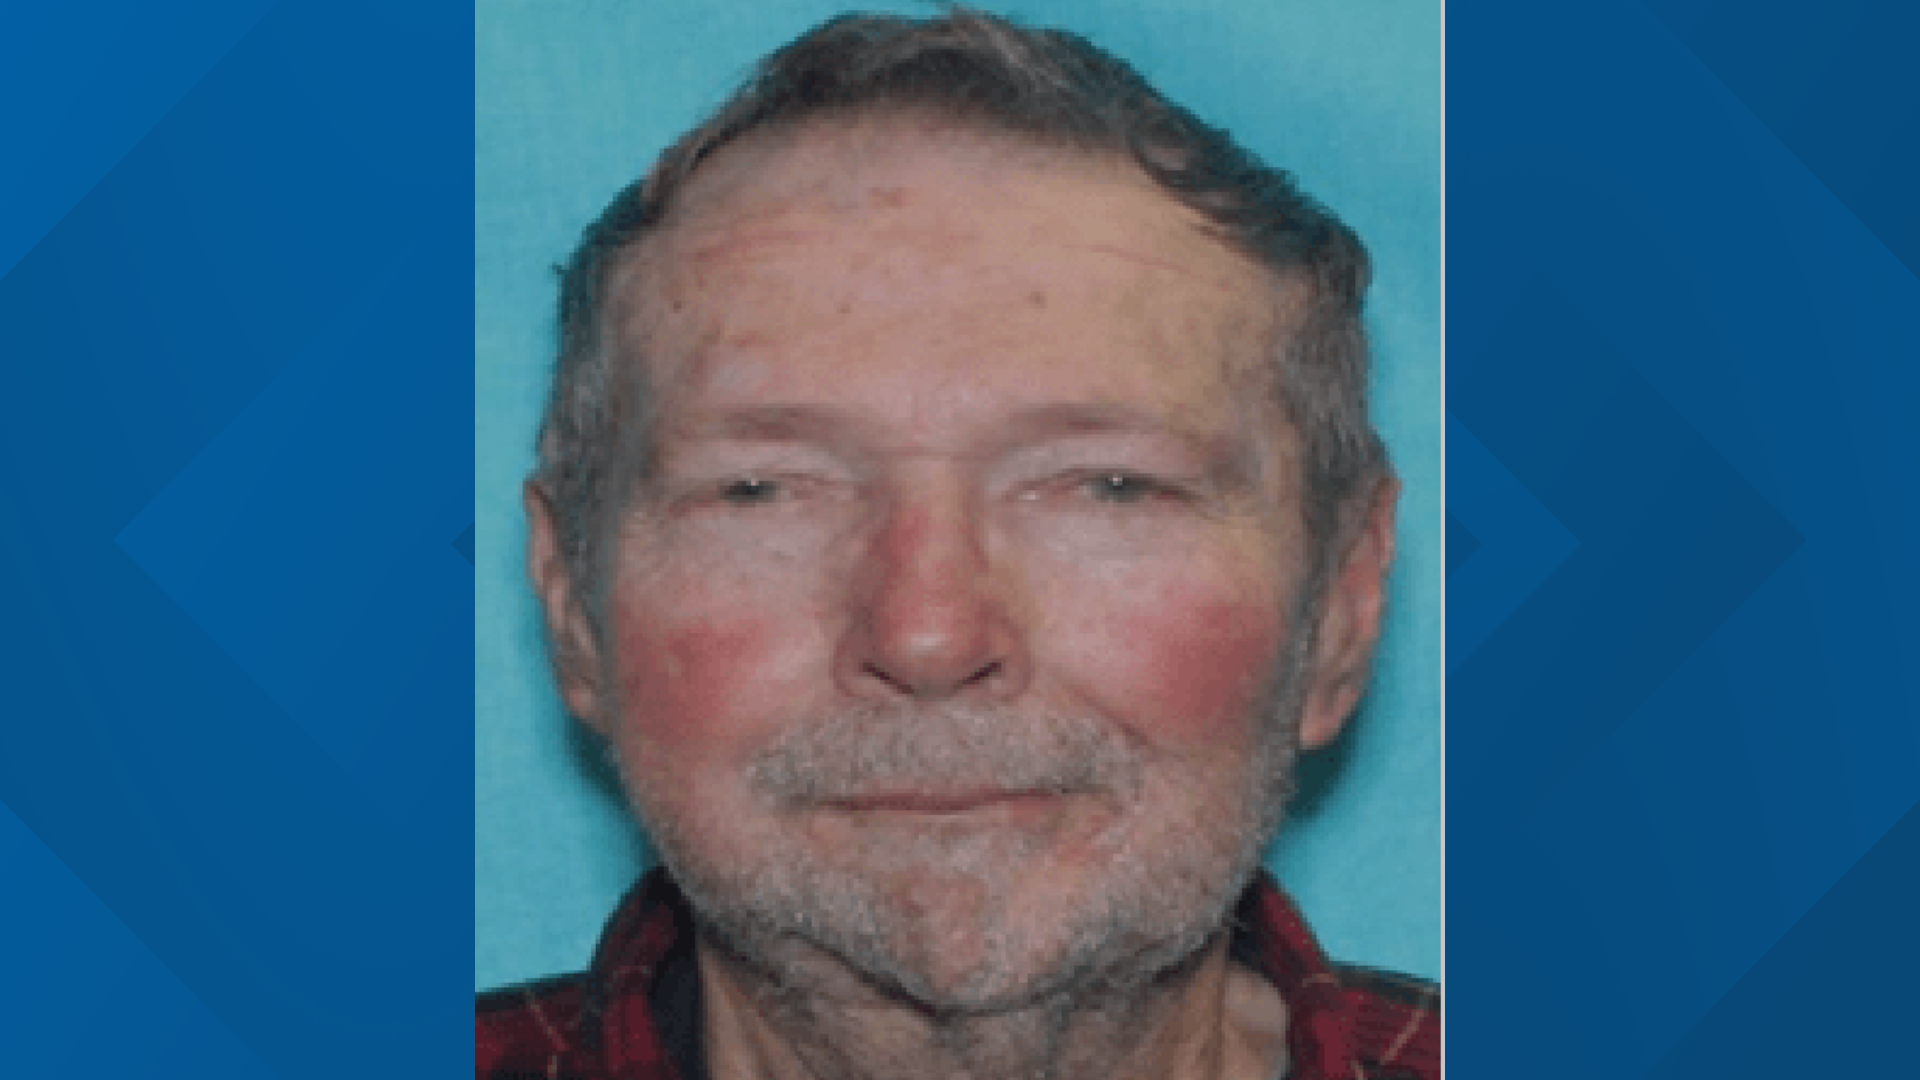 Dallas Police Locate Missing 84 Year Old Man